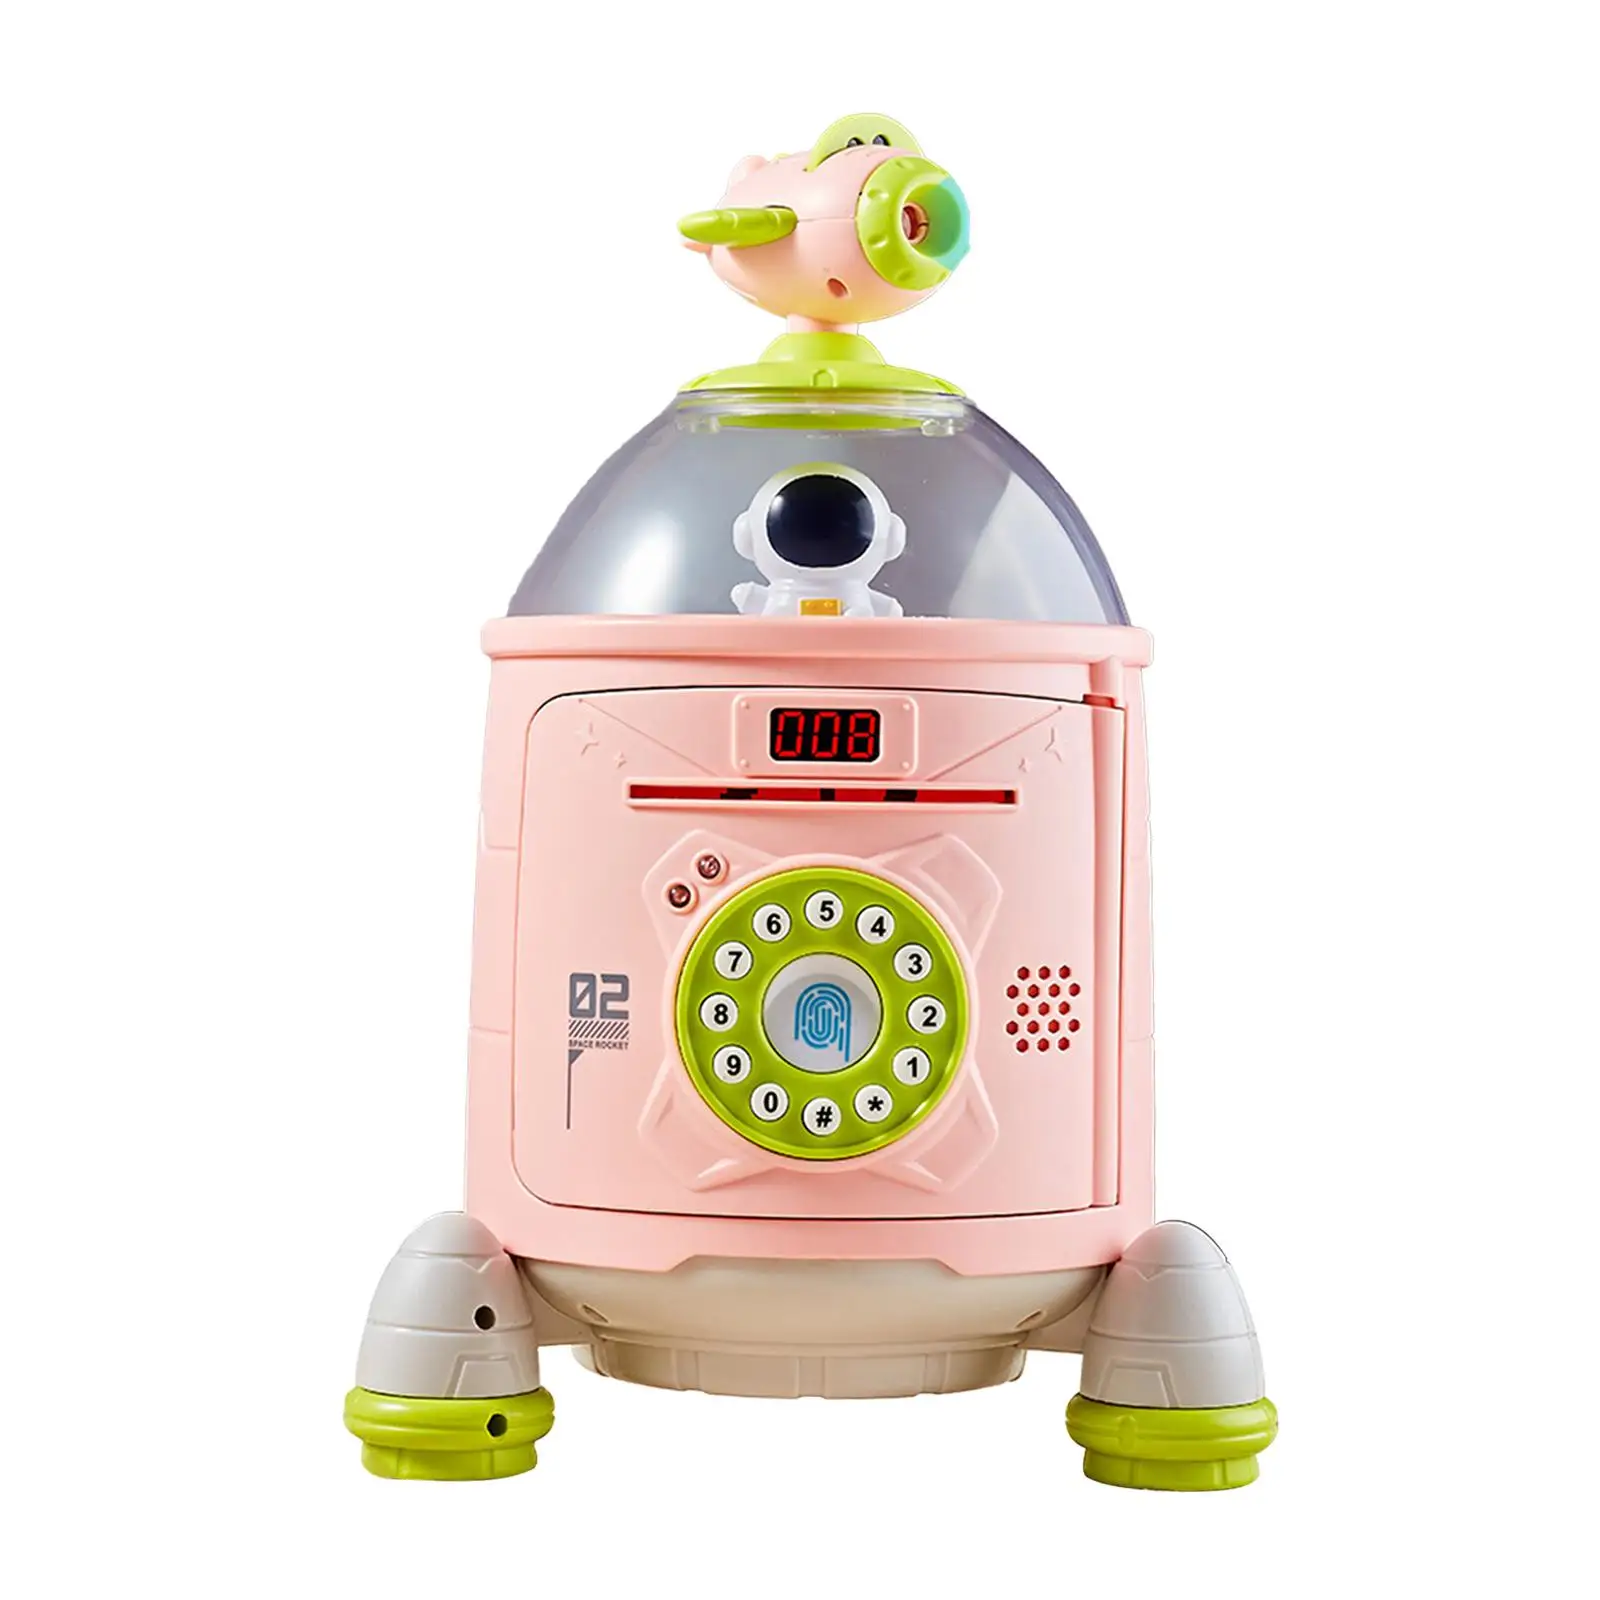 Rocket Piggy Bank with Fingerprint and Password Code Lock Birthday Gifts Home Ornament Learning Toy for Children Age 3-8 Years